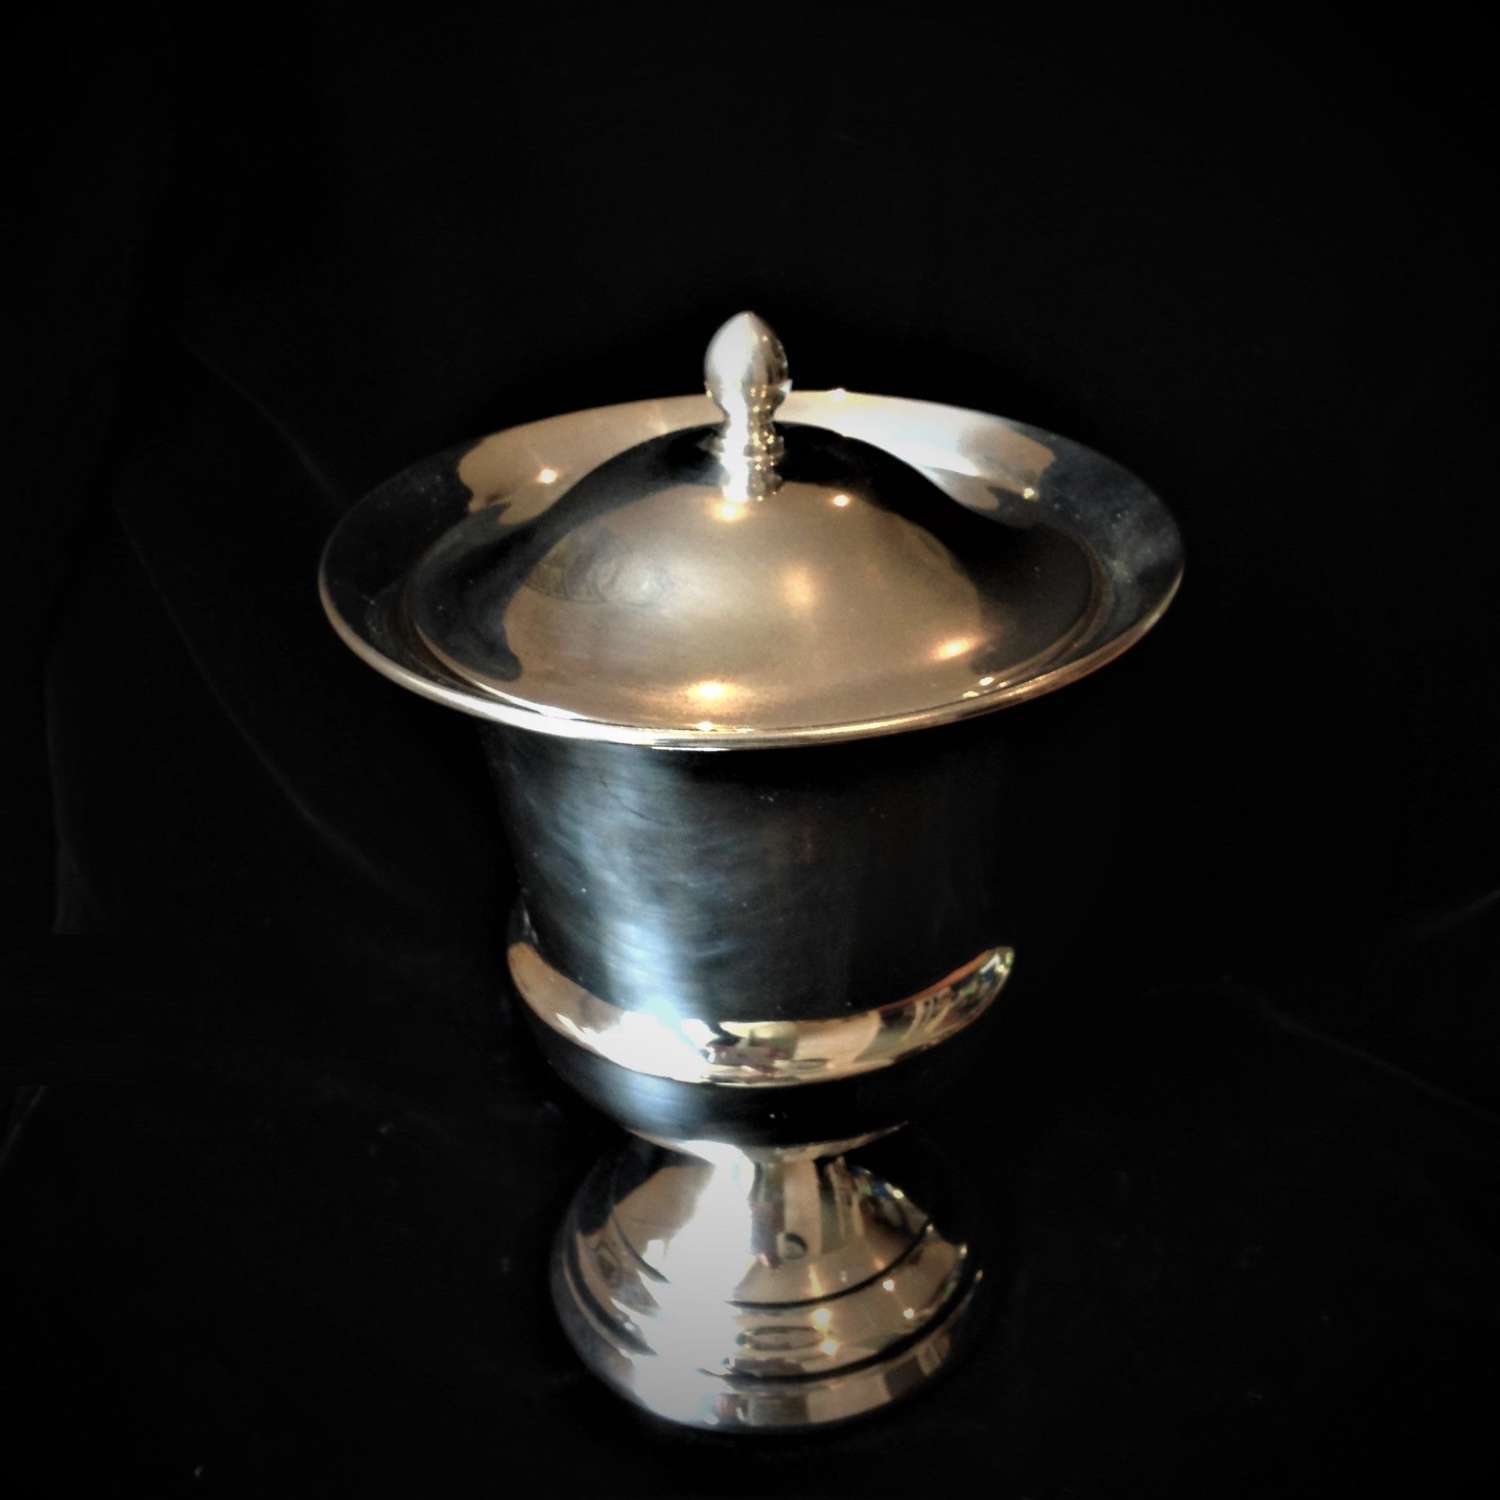 Urn shape, silver plated ice bucket / pail and cover